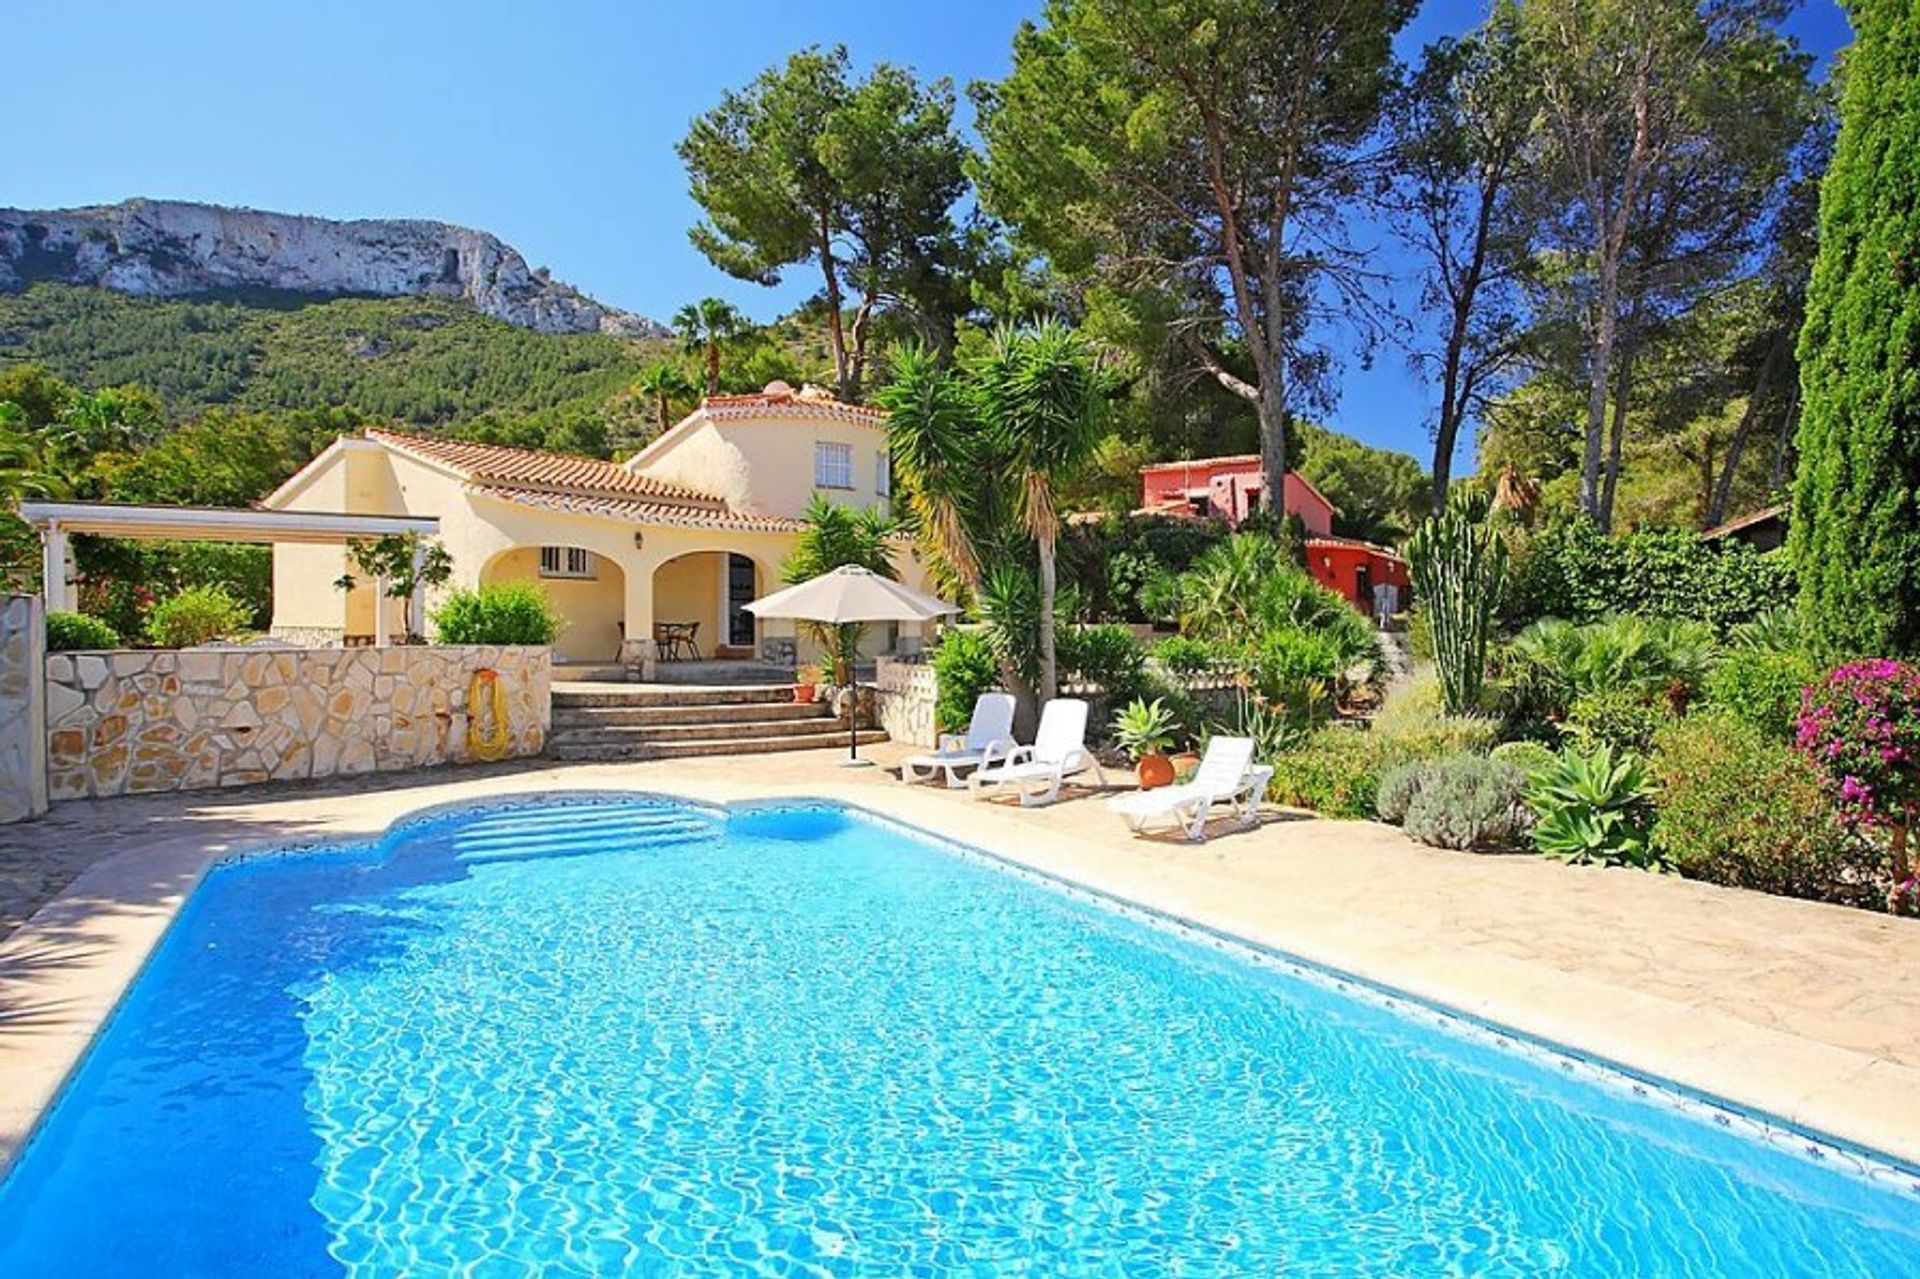 Stay in one of our luxury villas with private pools right in the heart of the rural countryside